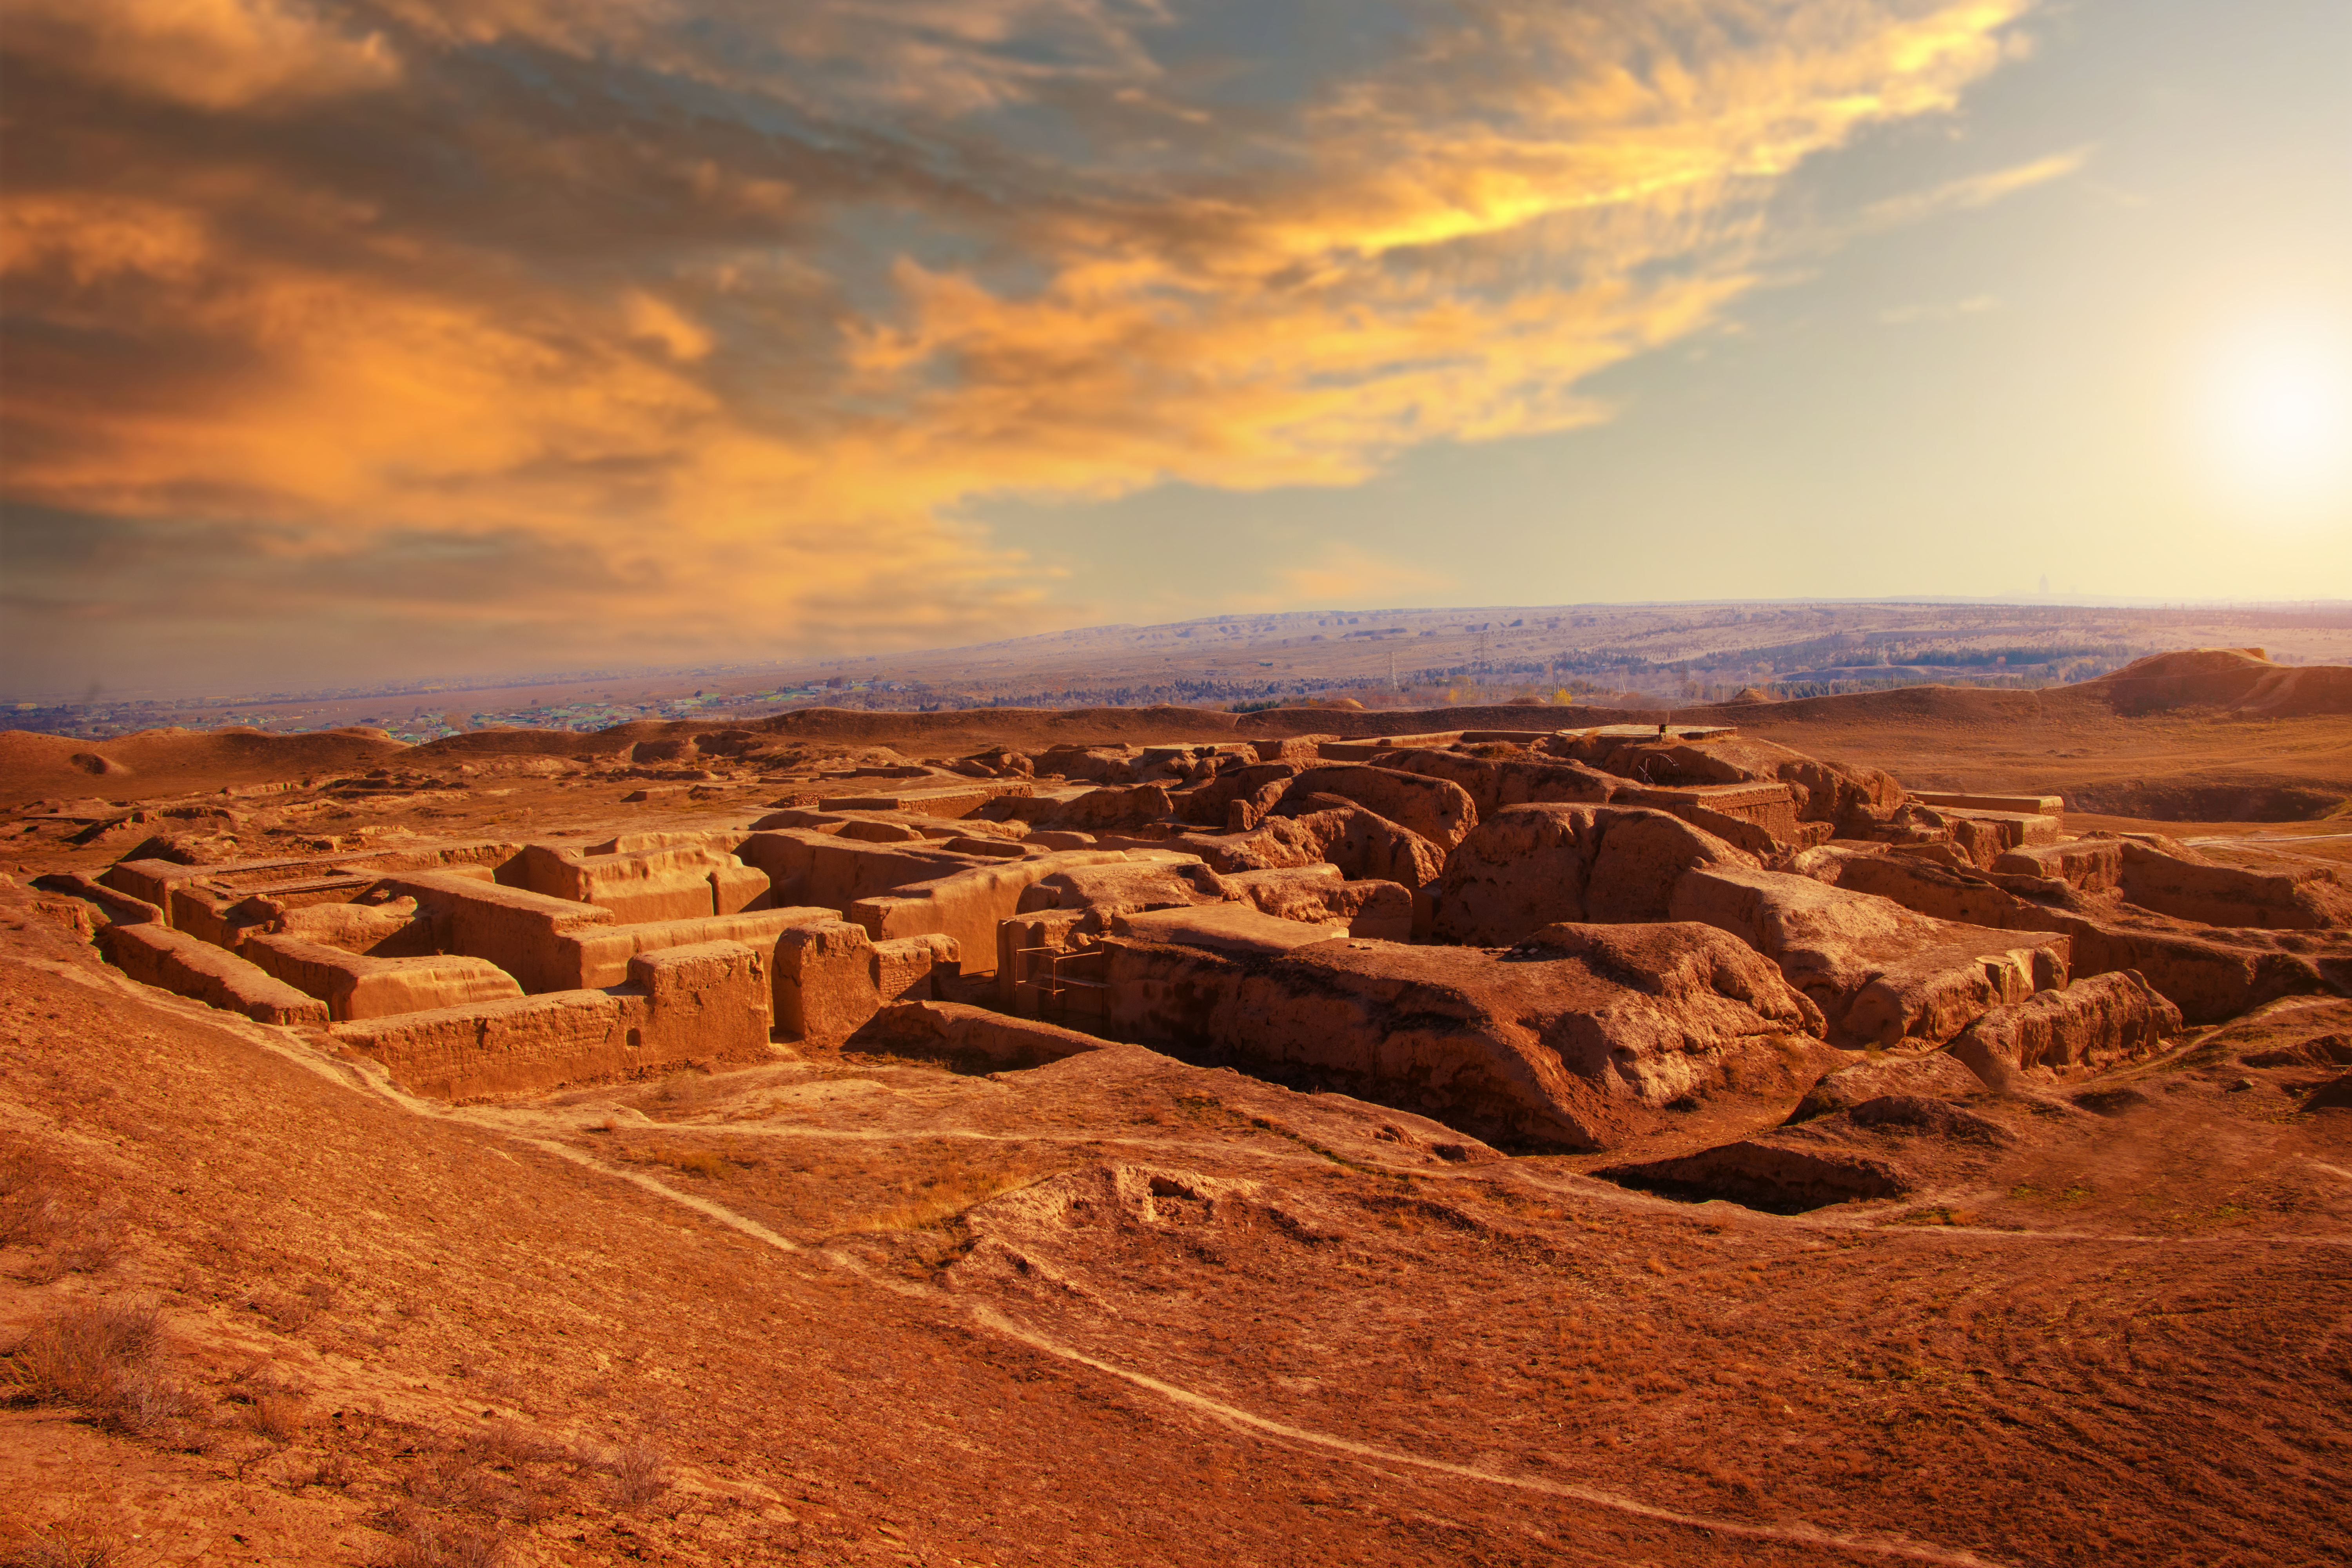 As the Parthian capital, Nisa was home to the rulers of an influential Iranian empire, which was established in 247 BCE. – © Eziz Charyyev / Shutterstock